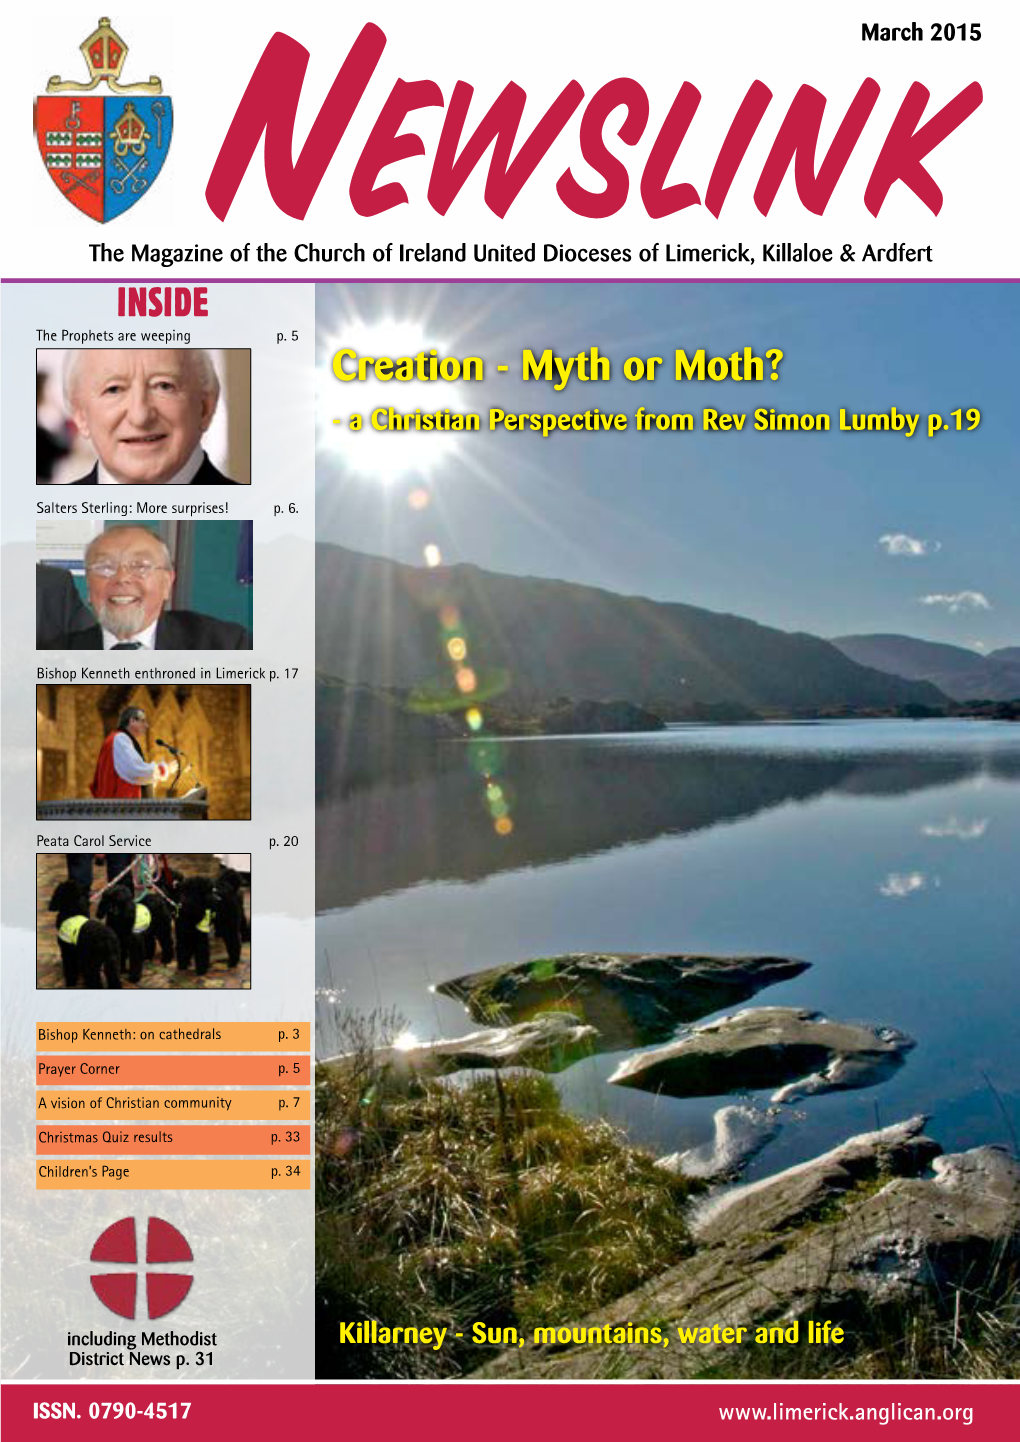 March 2015 Newslink the Magazine of the Church of Ireland United Dioceses of Limerick, Killaloe & Ardfert INSIDE the Prophets Are Weeping P